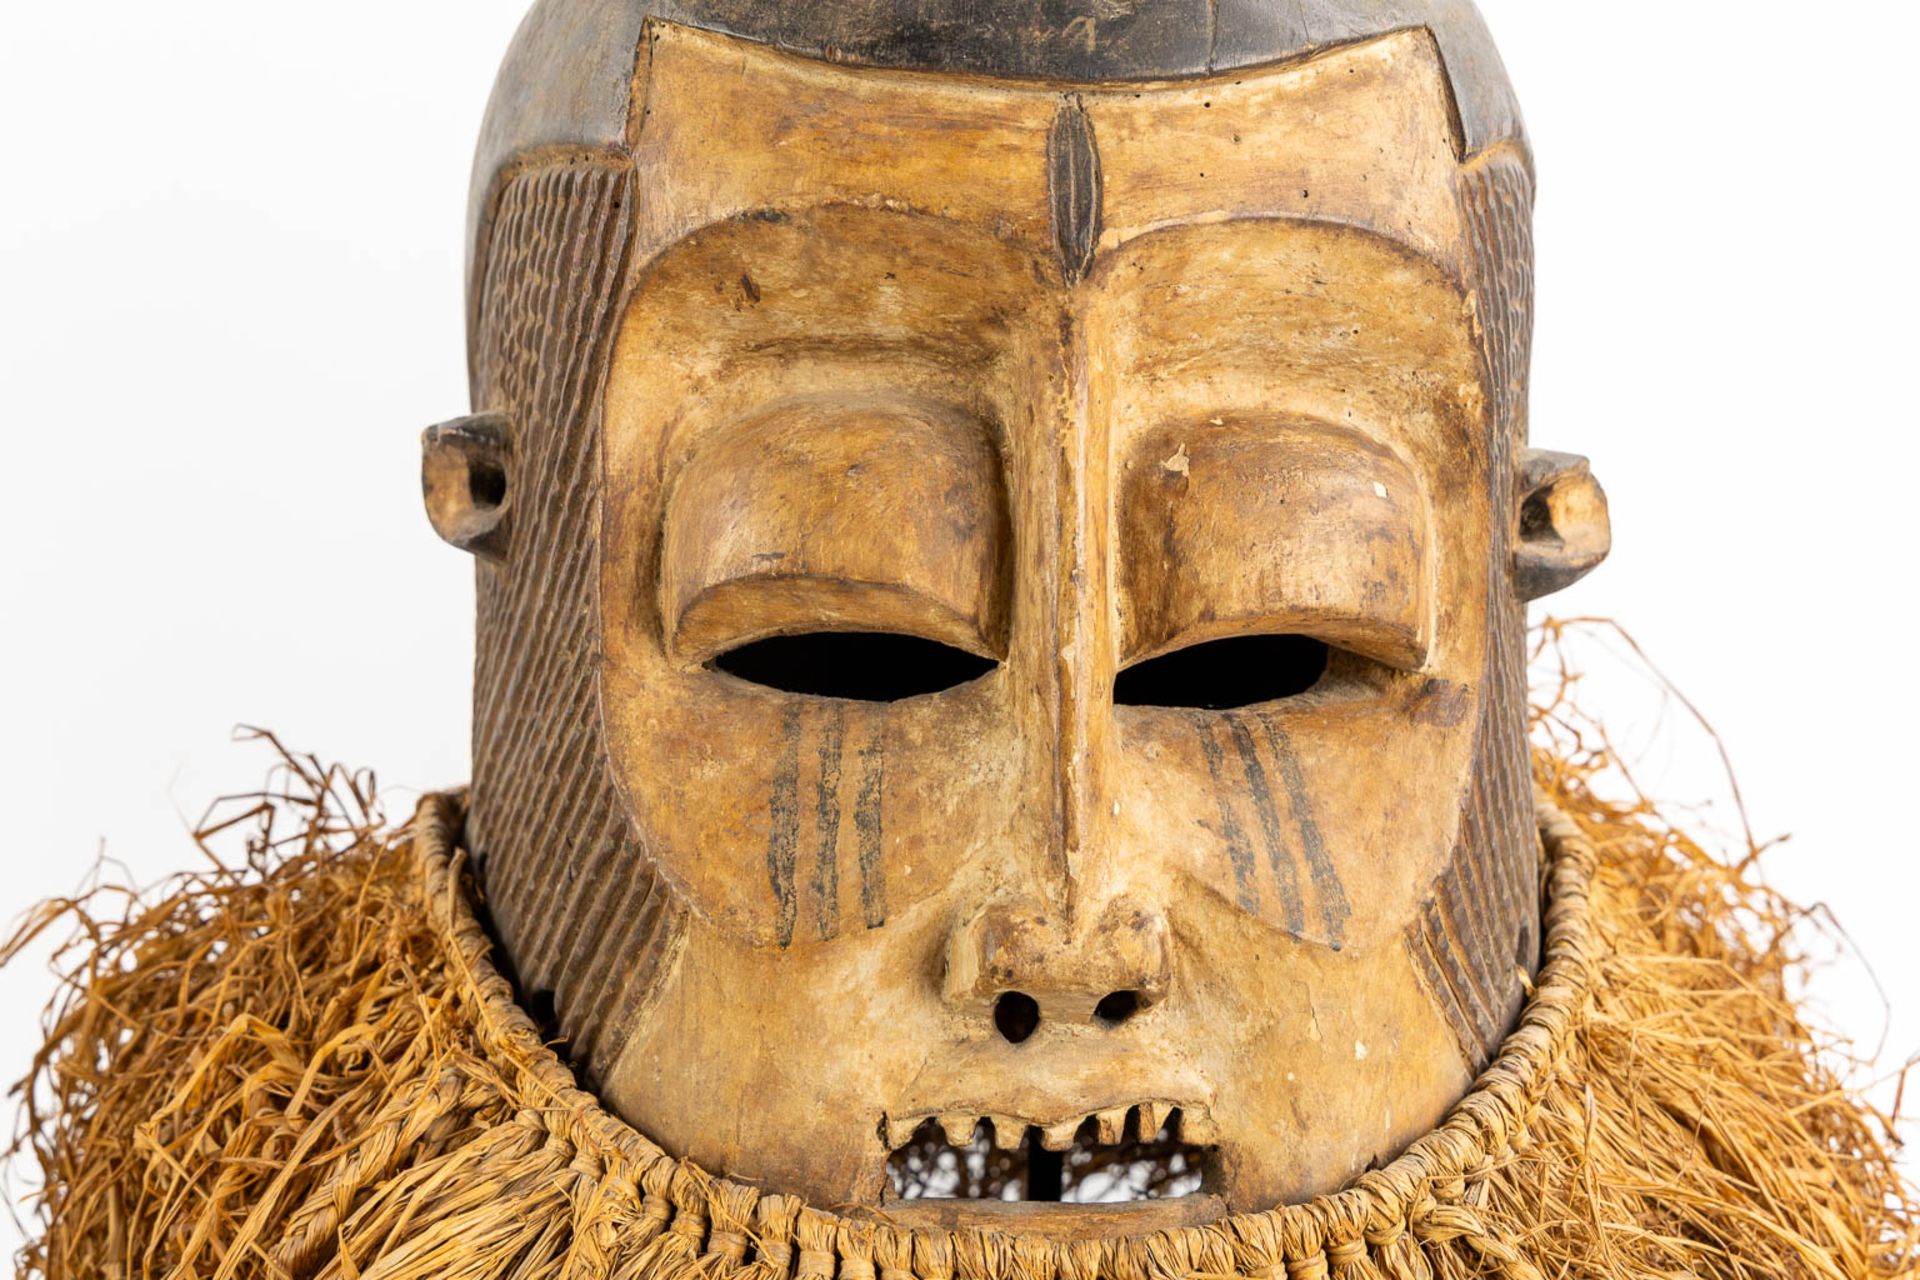 Suku Tribe, two decorative African masks. Wood and straw. (L:44 x W:40 x H:48 cm) - Image 8 of 11